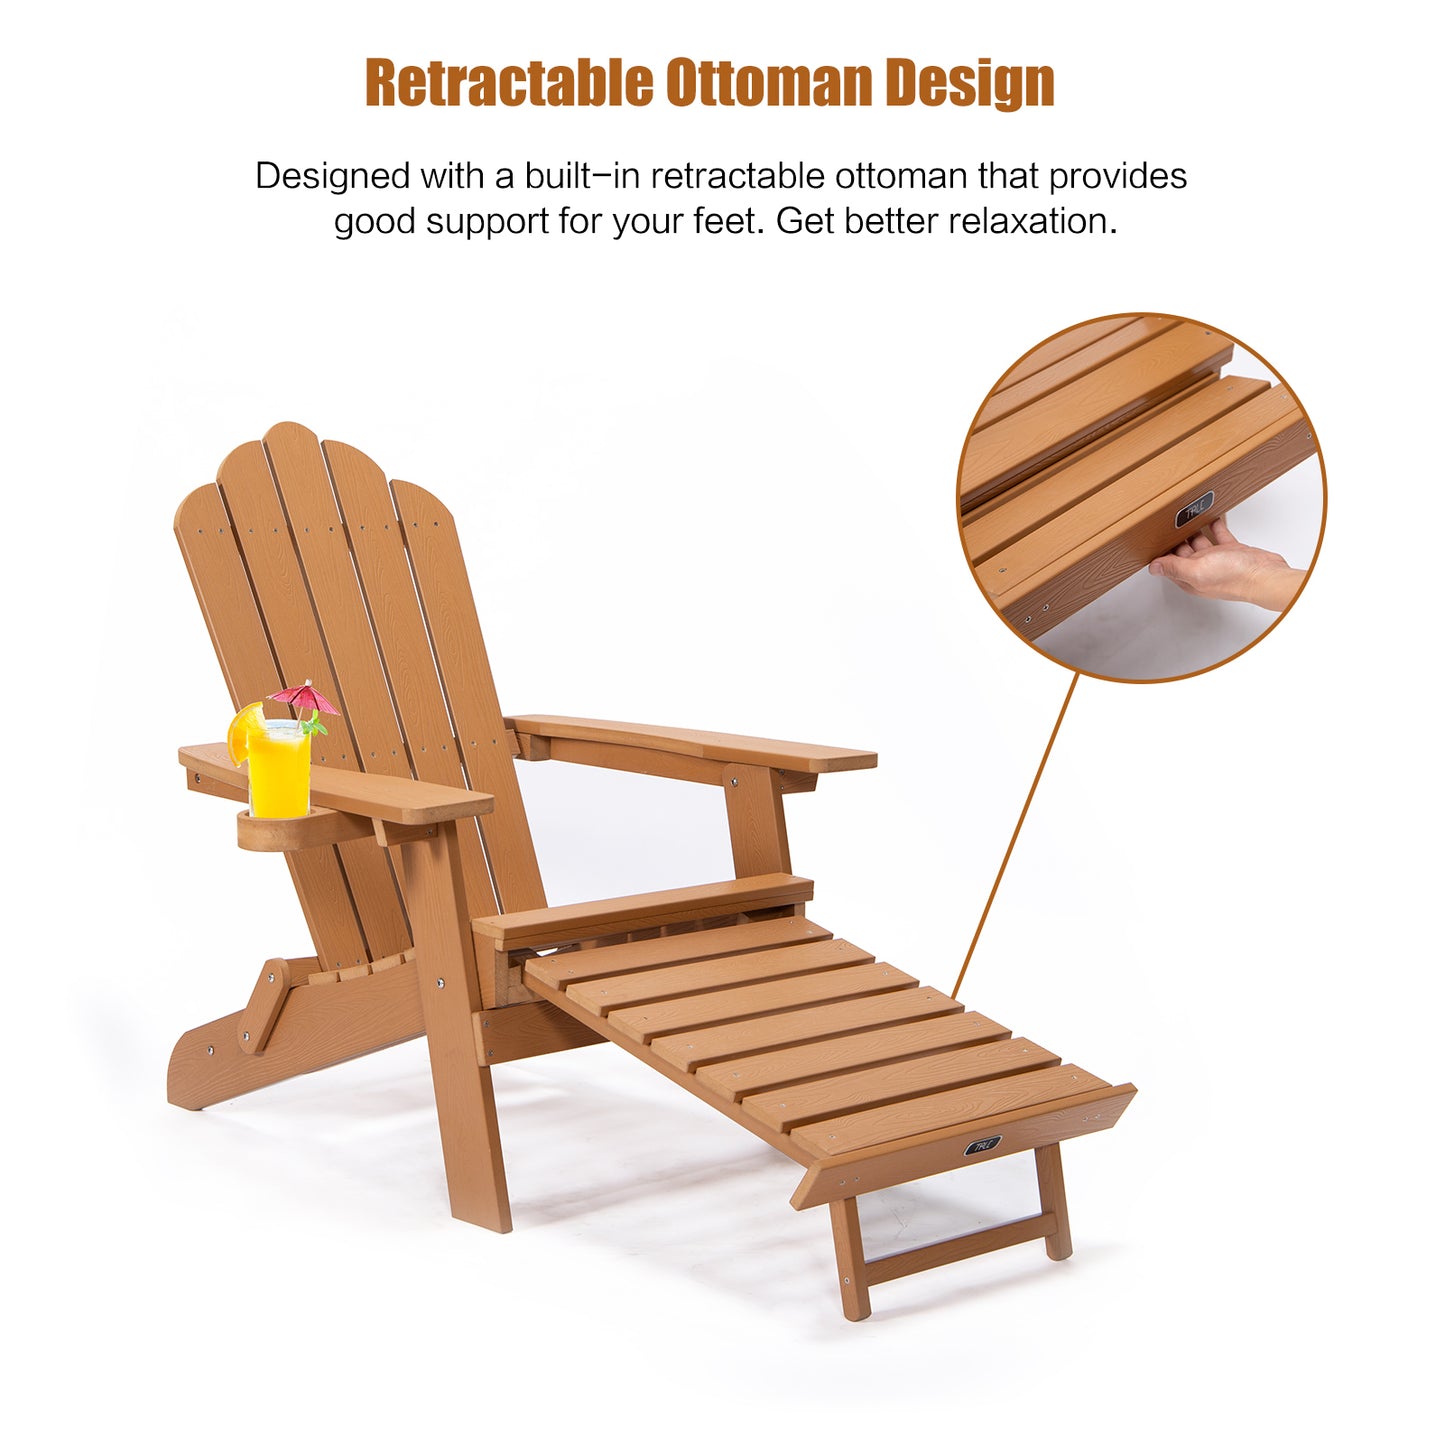 TALE Folding Adirondack Chair with Pullout Ottoman with Cup Holder, Oversized, Poly Lumber,  for Patio Deck Garden, Backyard Furniture, Easy to Install,BROWN. Ban on Amazon